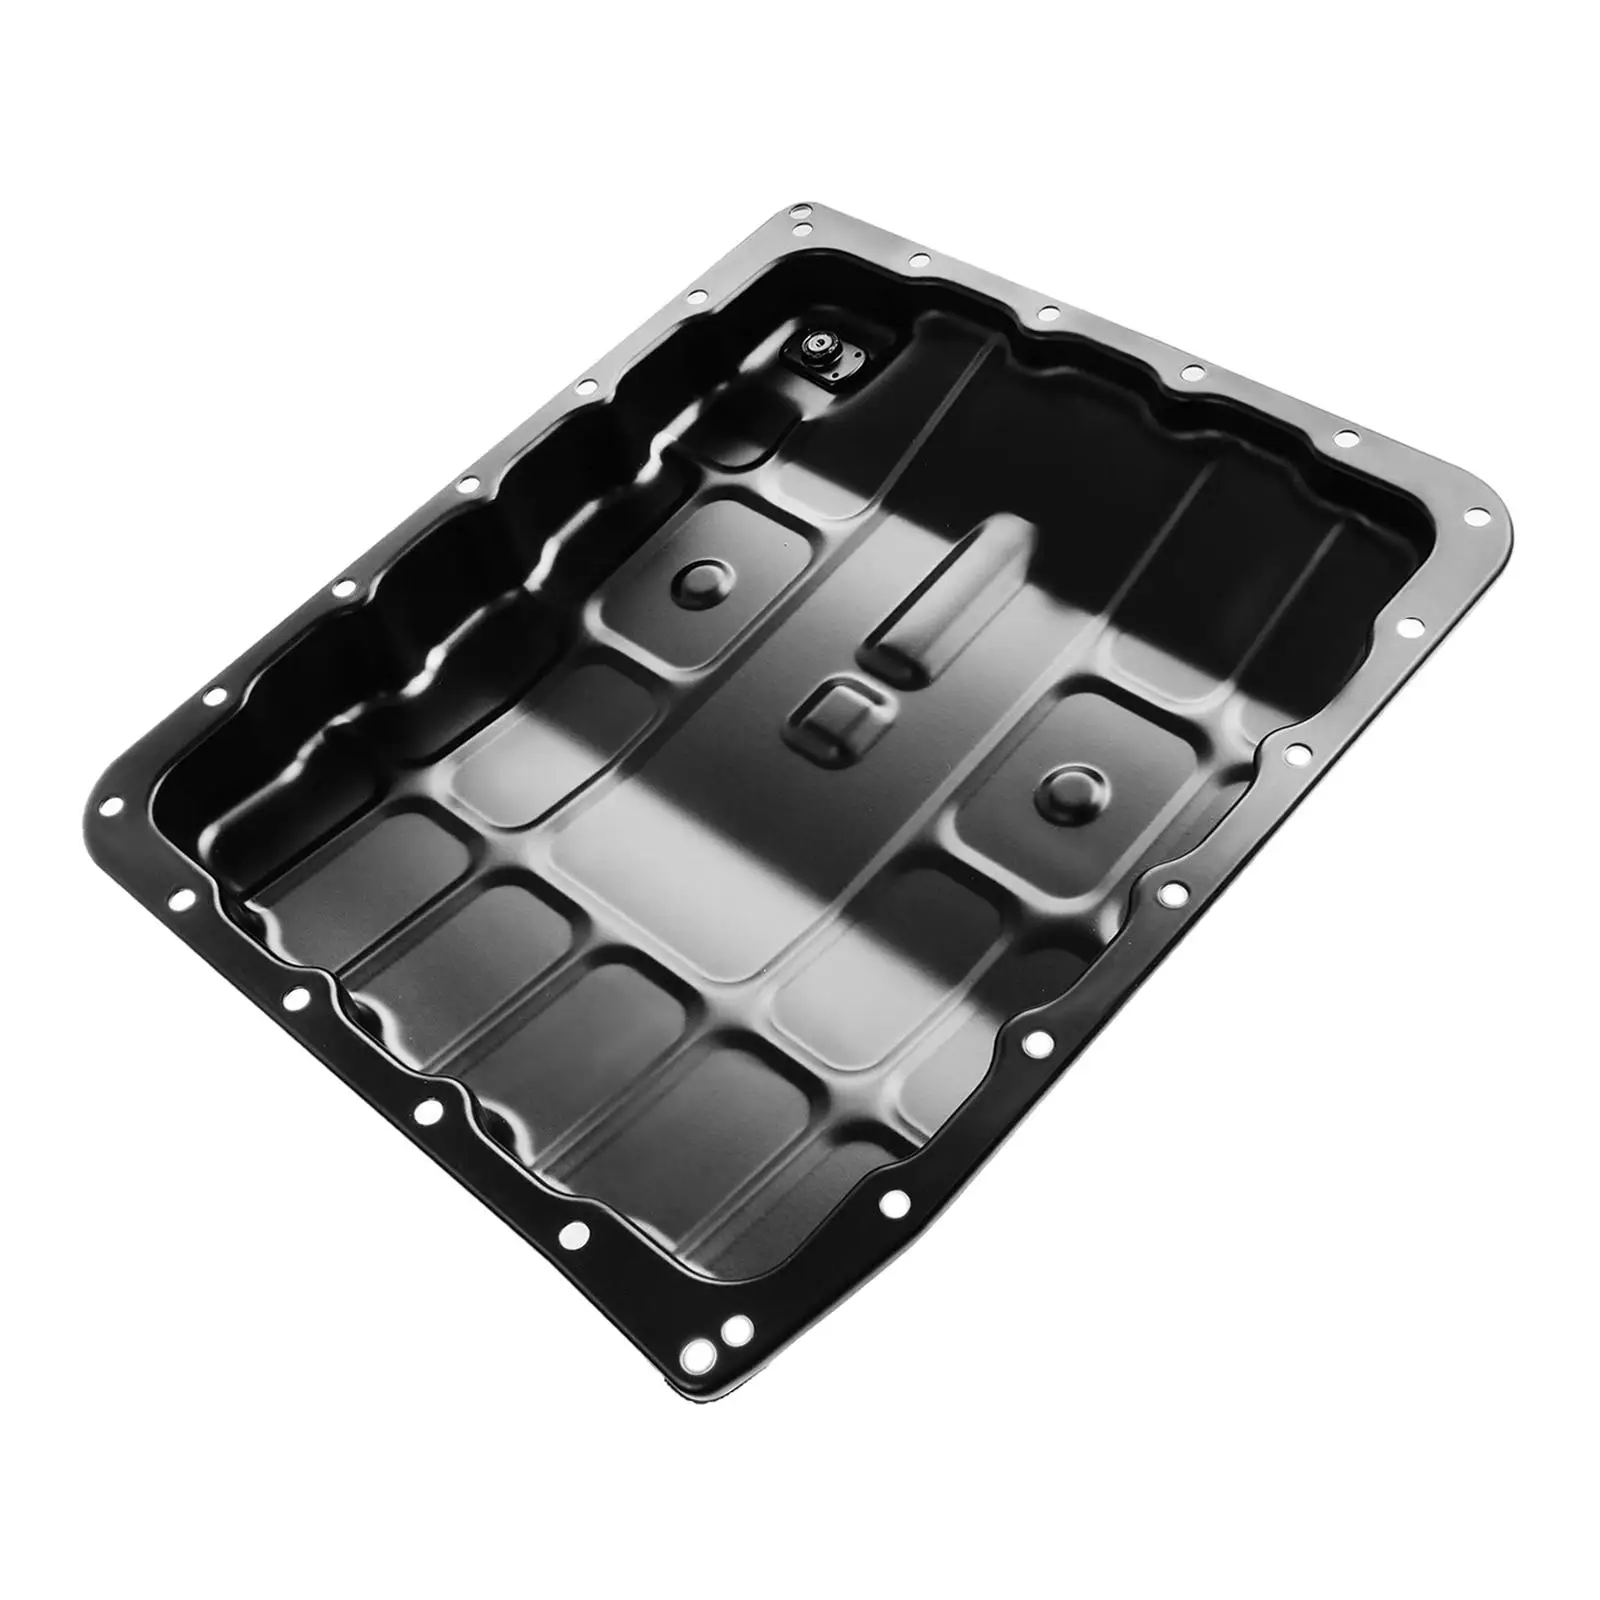 Transmission Oil Pan 3139090x0B Easily Install Fittings High Performance Car Replace Parts for Nissan Frontier Titan 350Z